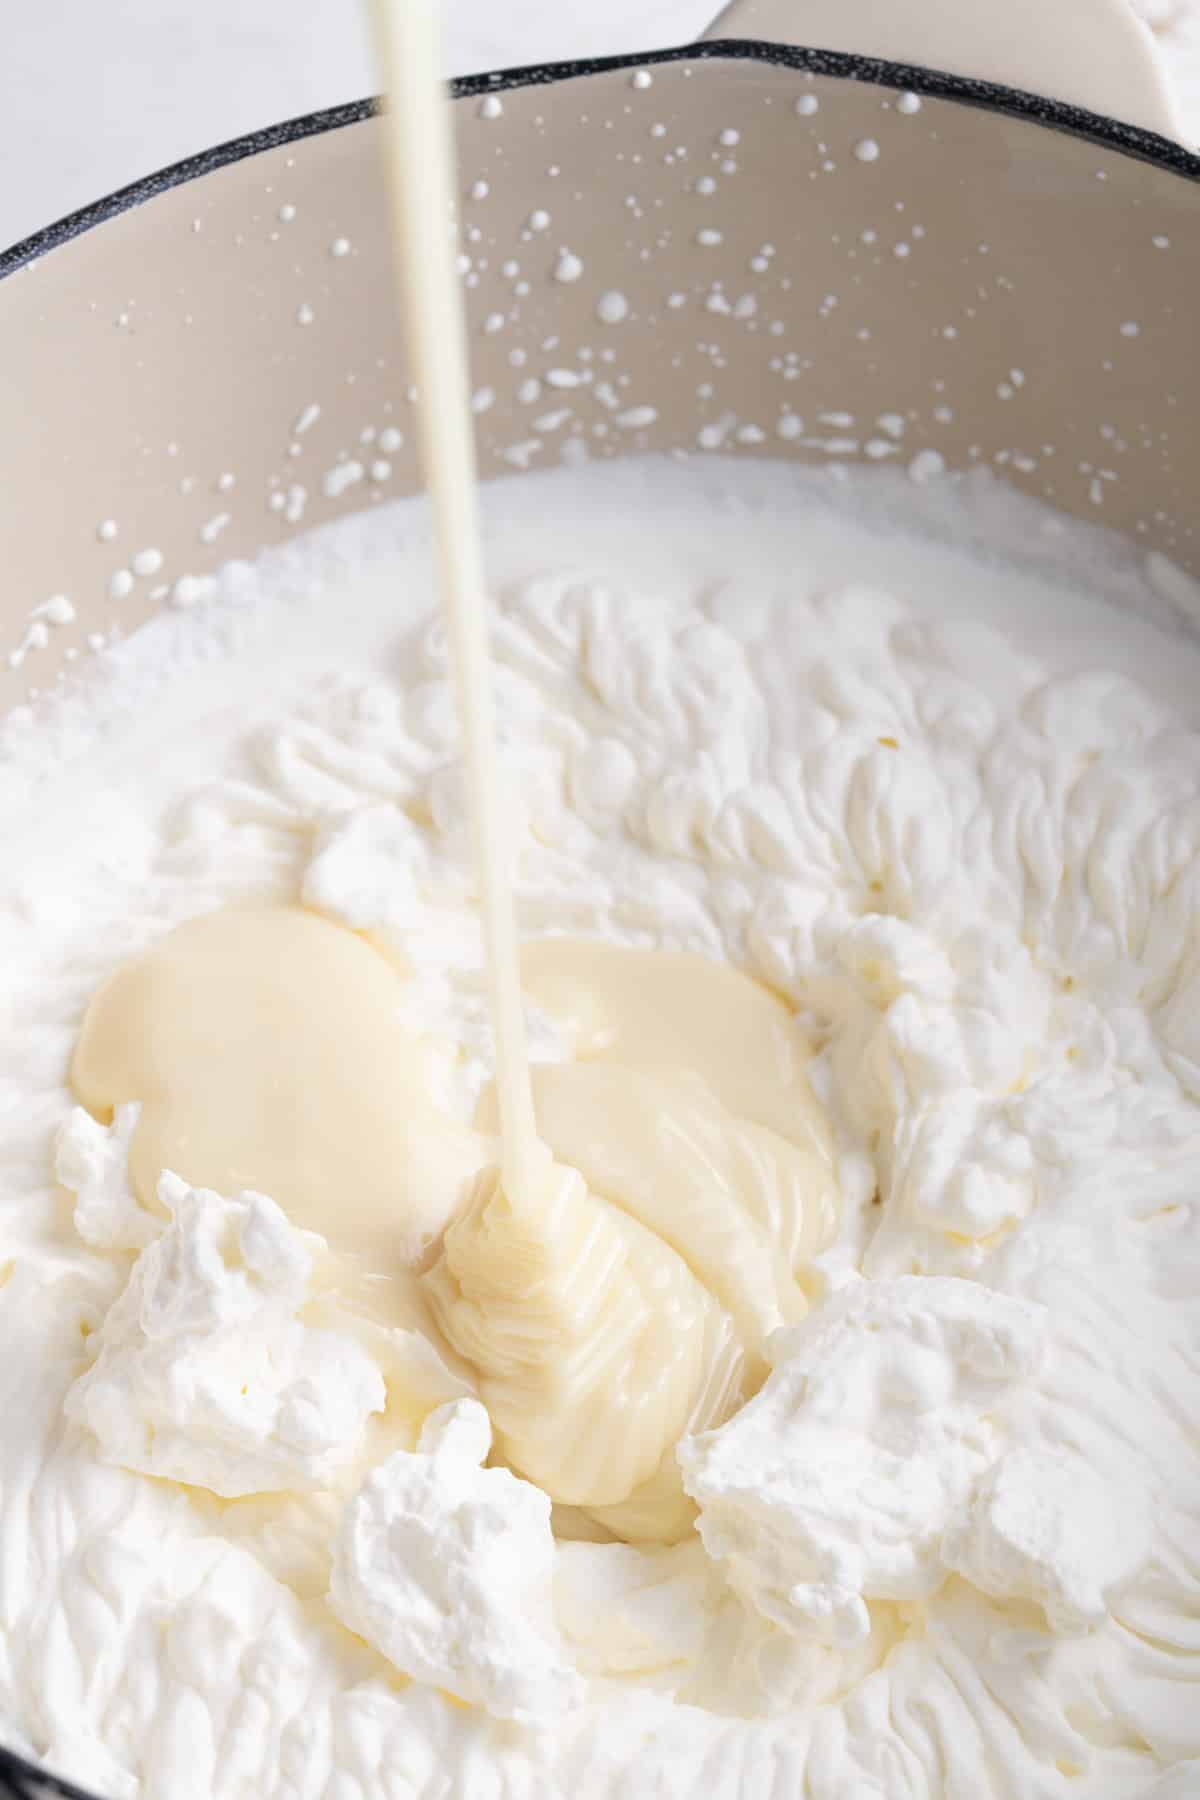 sweetened condensed milk being poured into whipped heavy cream